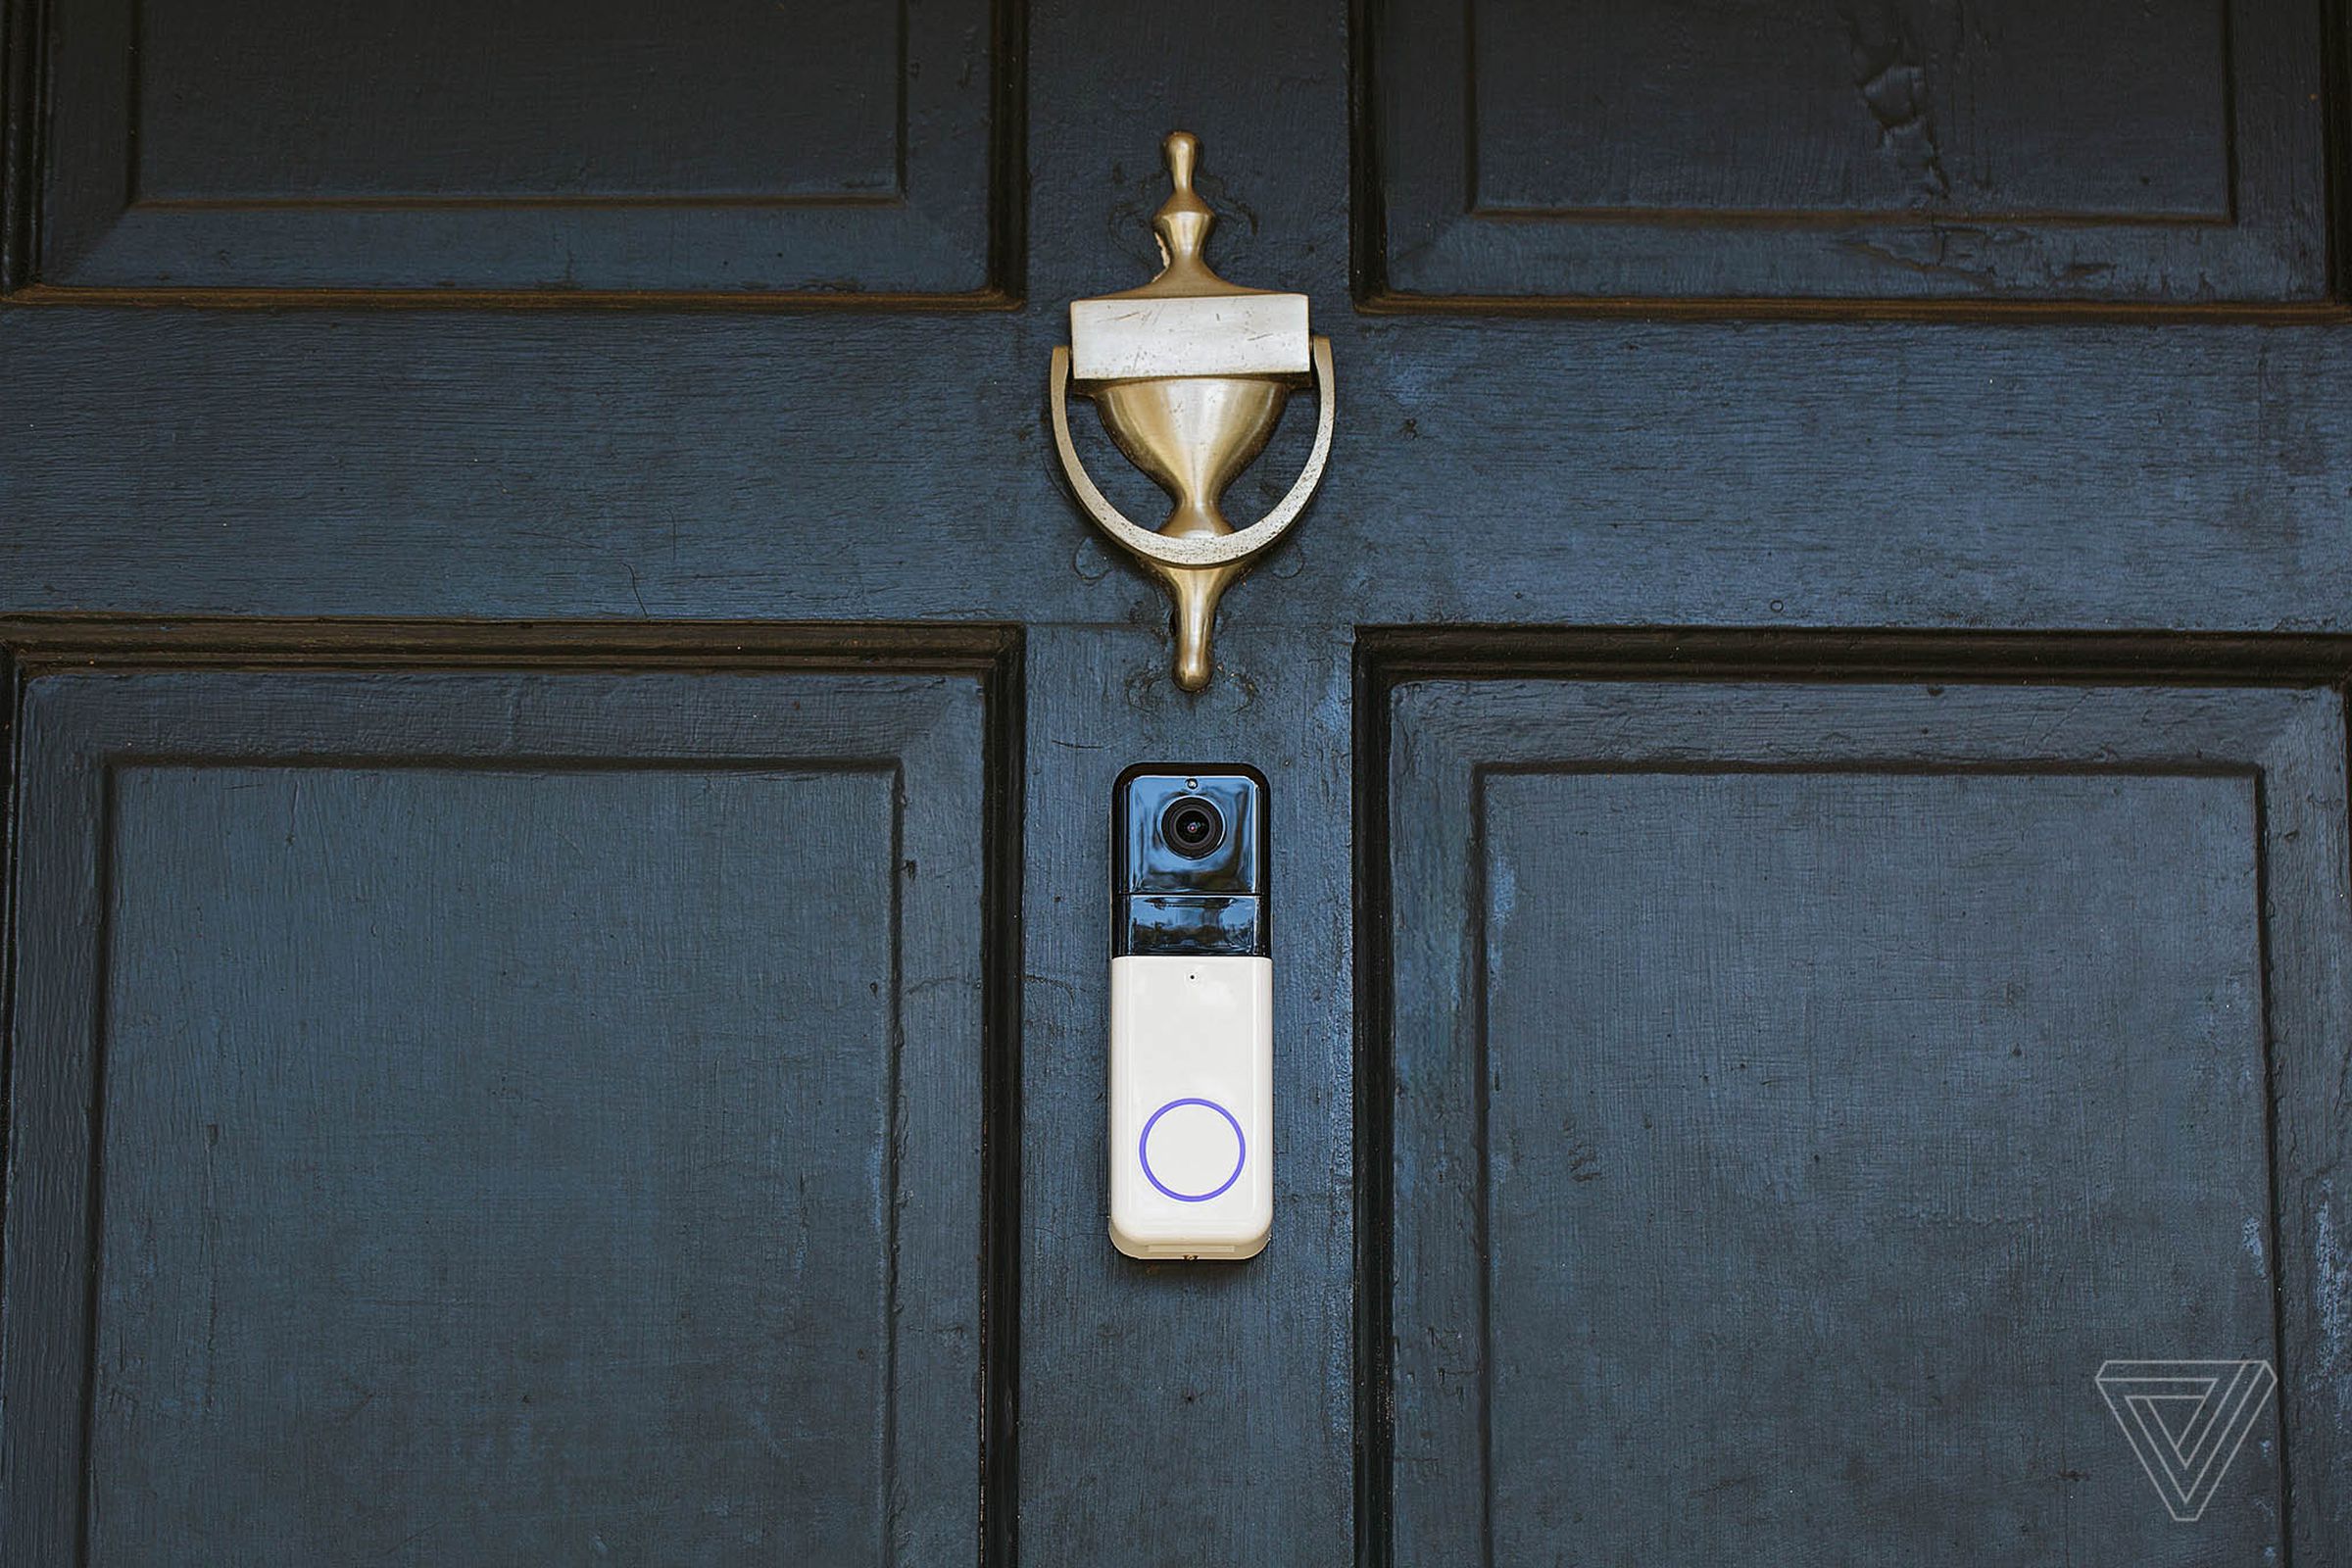 The Wyze Video Doorbell Pro is a doorbell camera that can be battery-powered or wired to existing doorbell wiring.